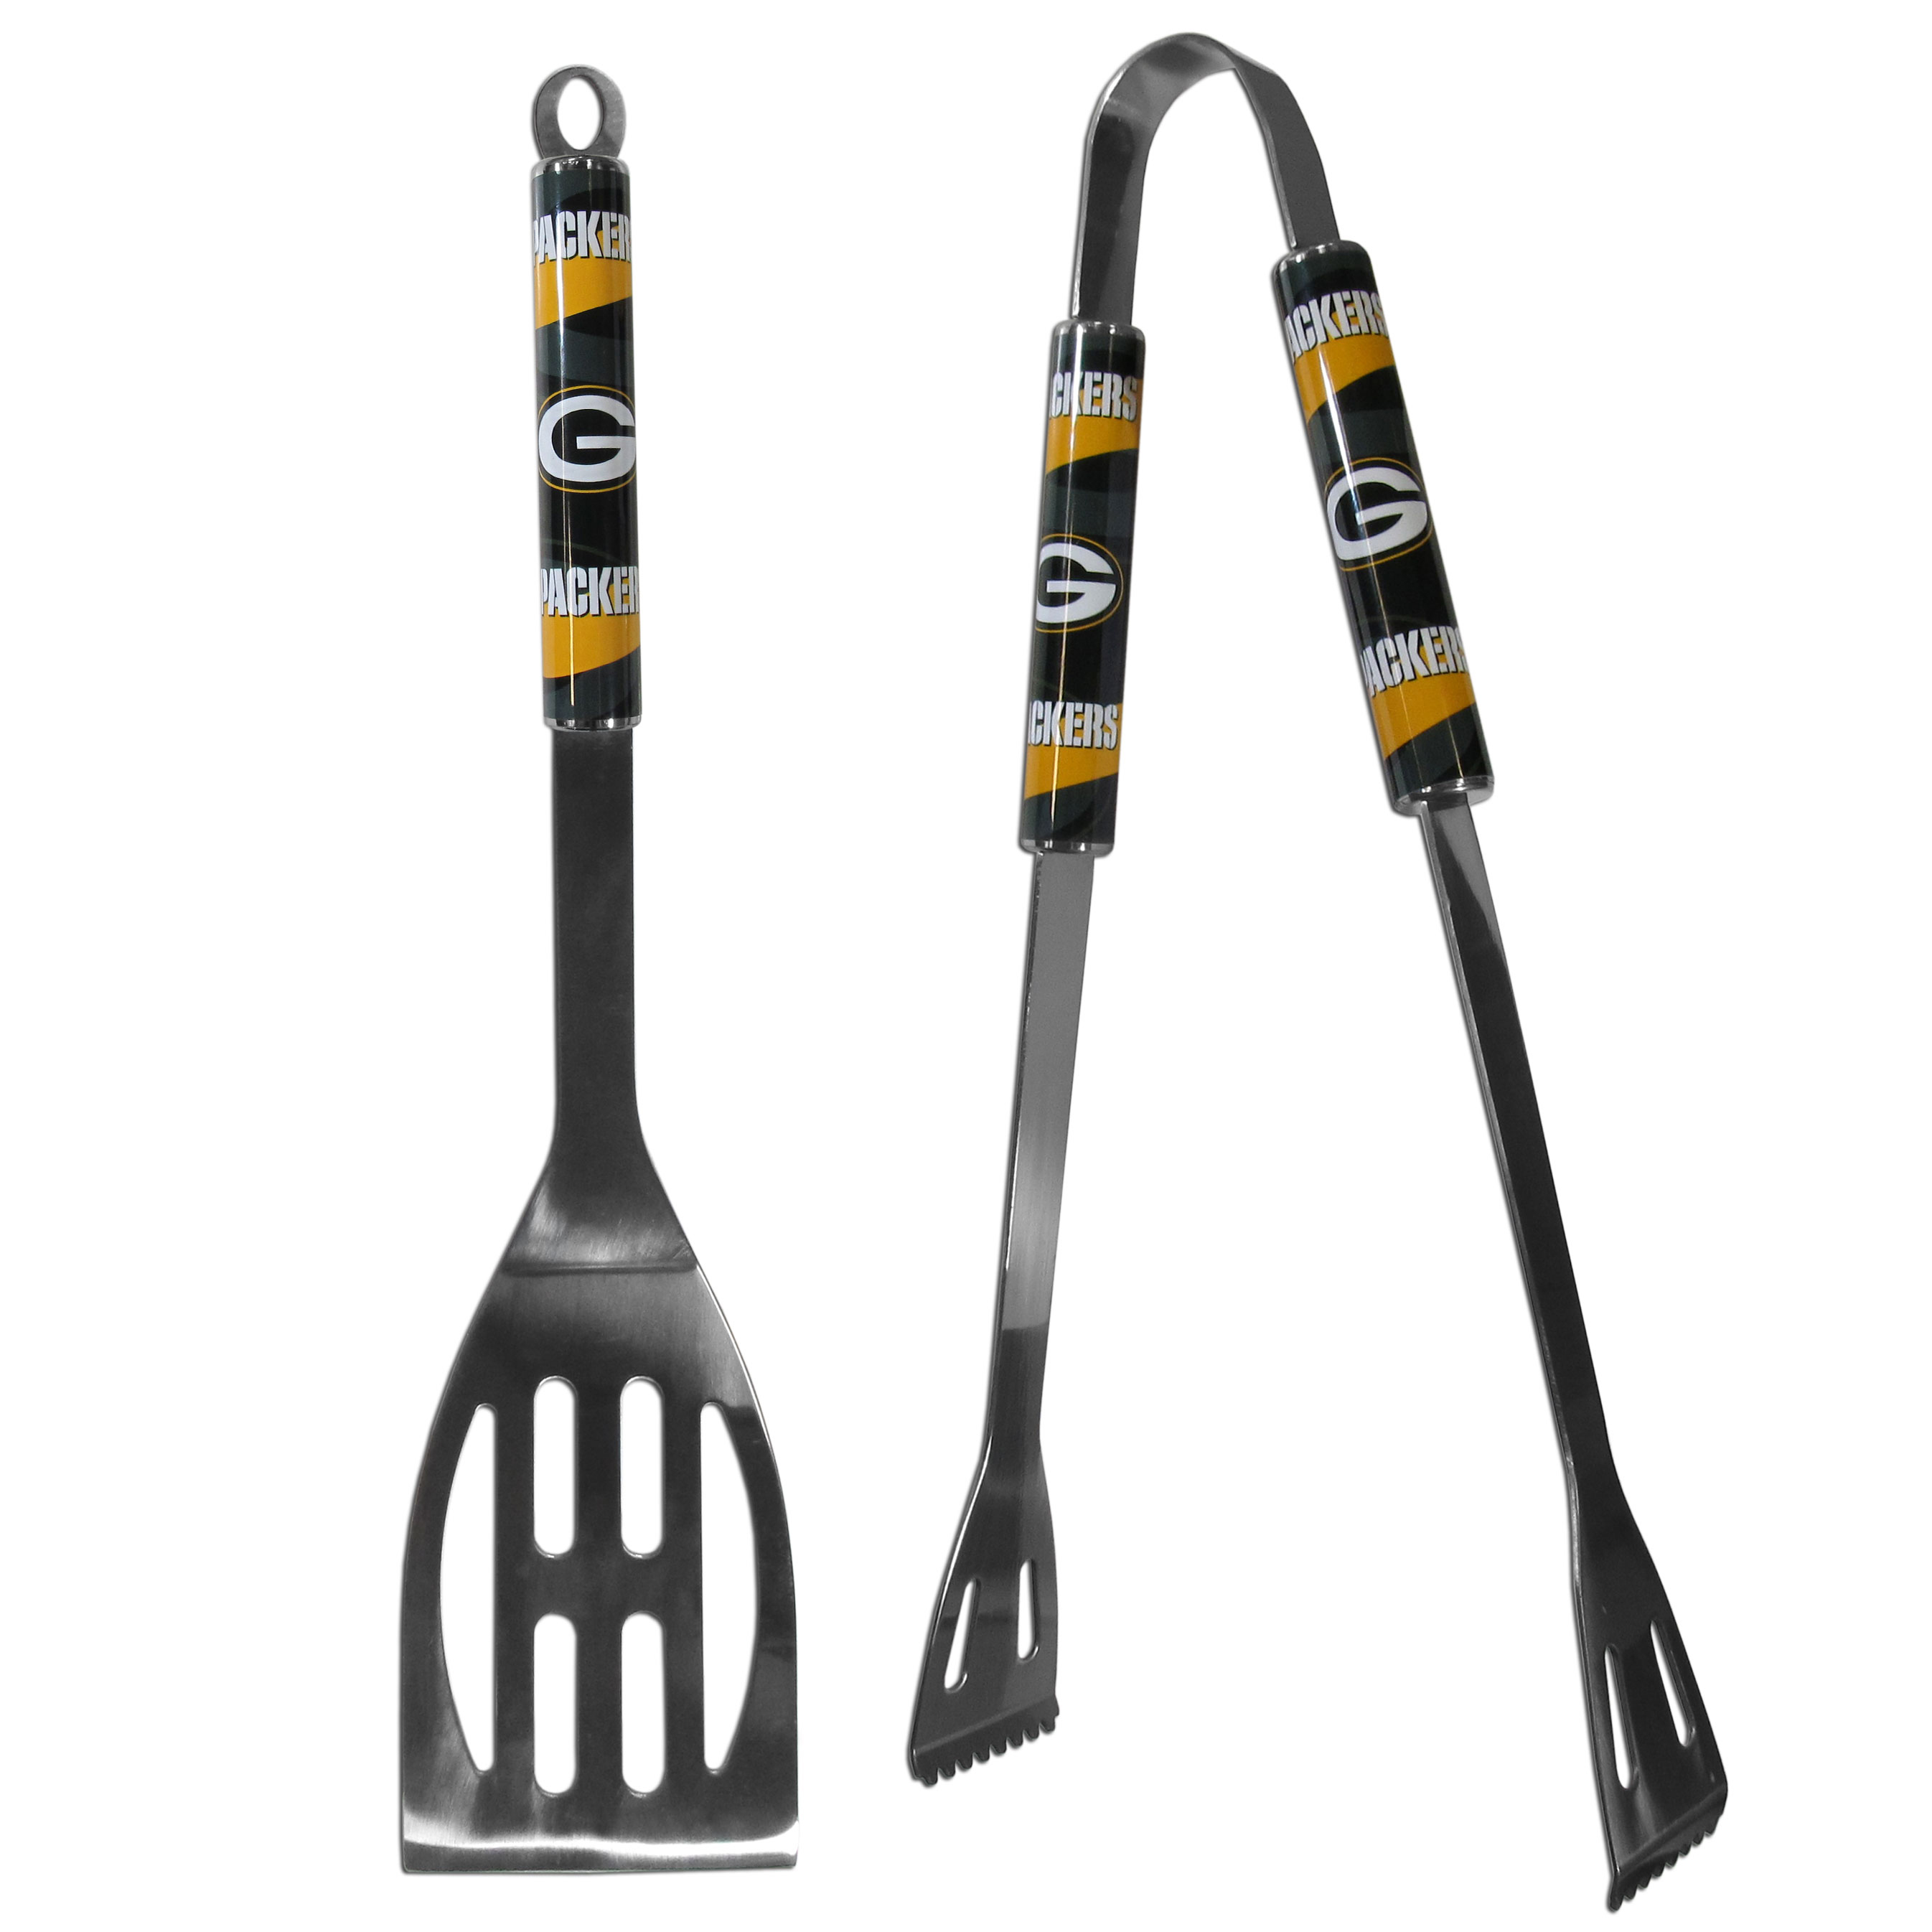 NFL Green Bay Packers 2 piece BBQ Steel TOOL/Grill Set